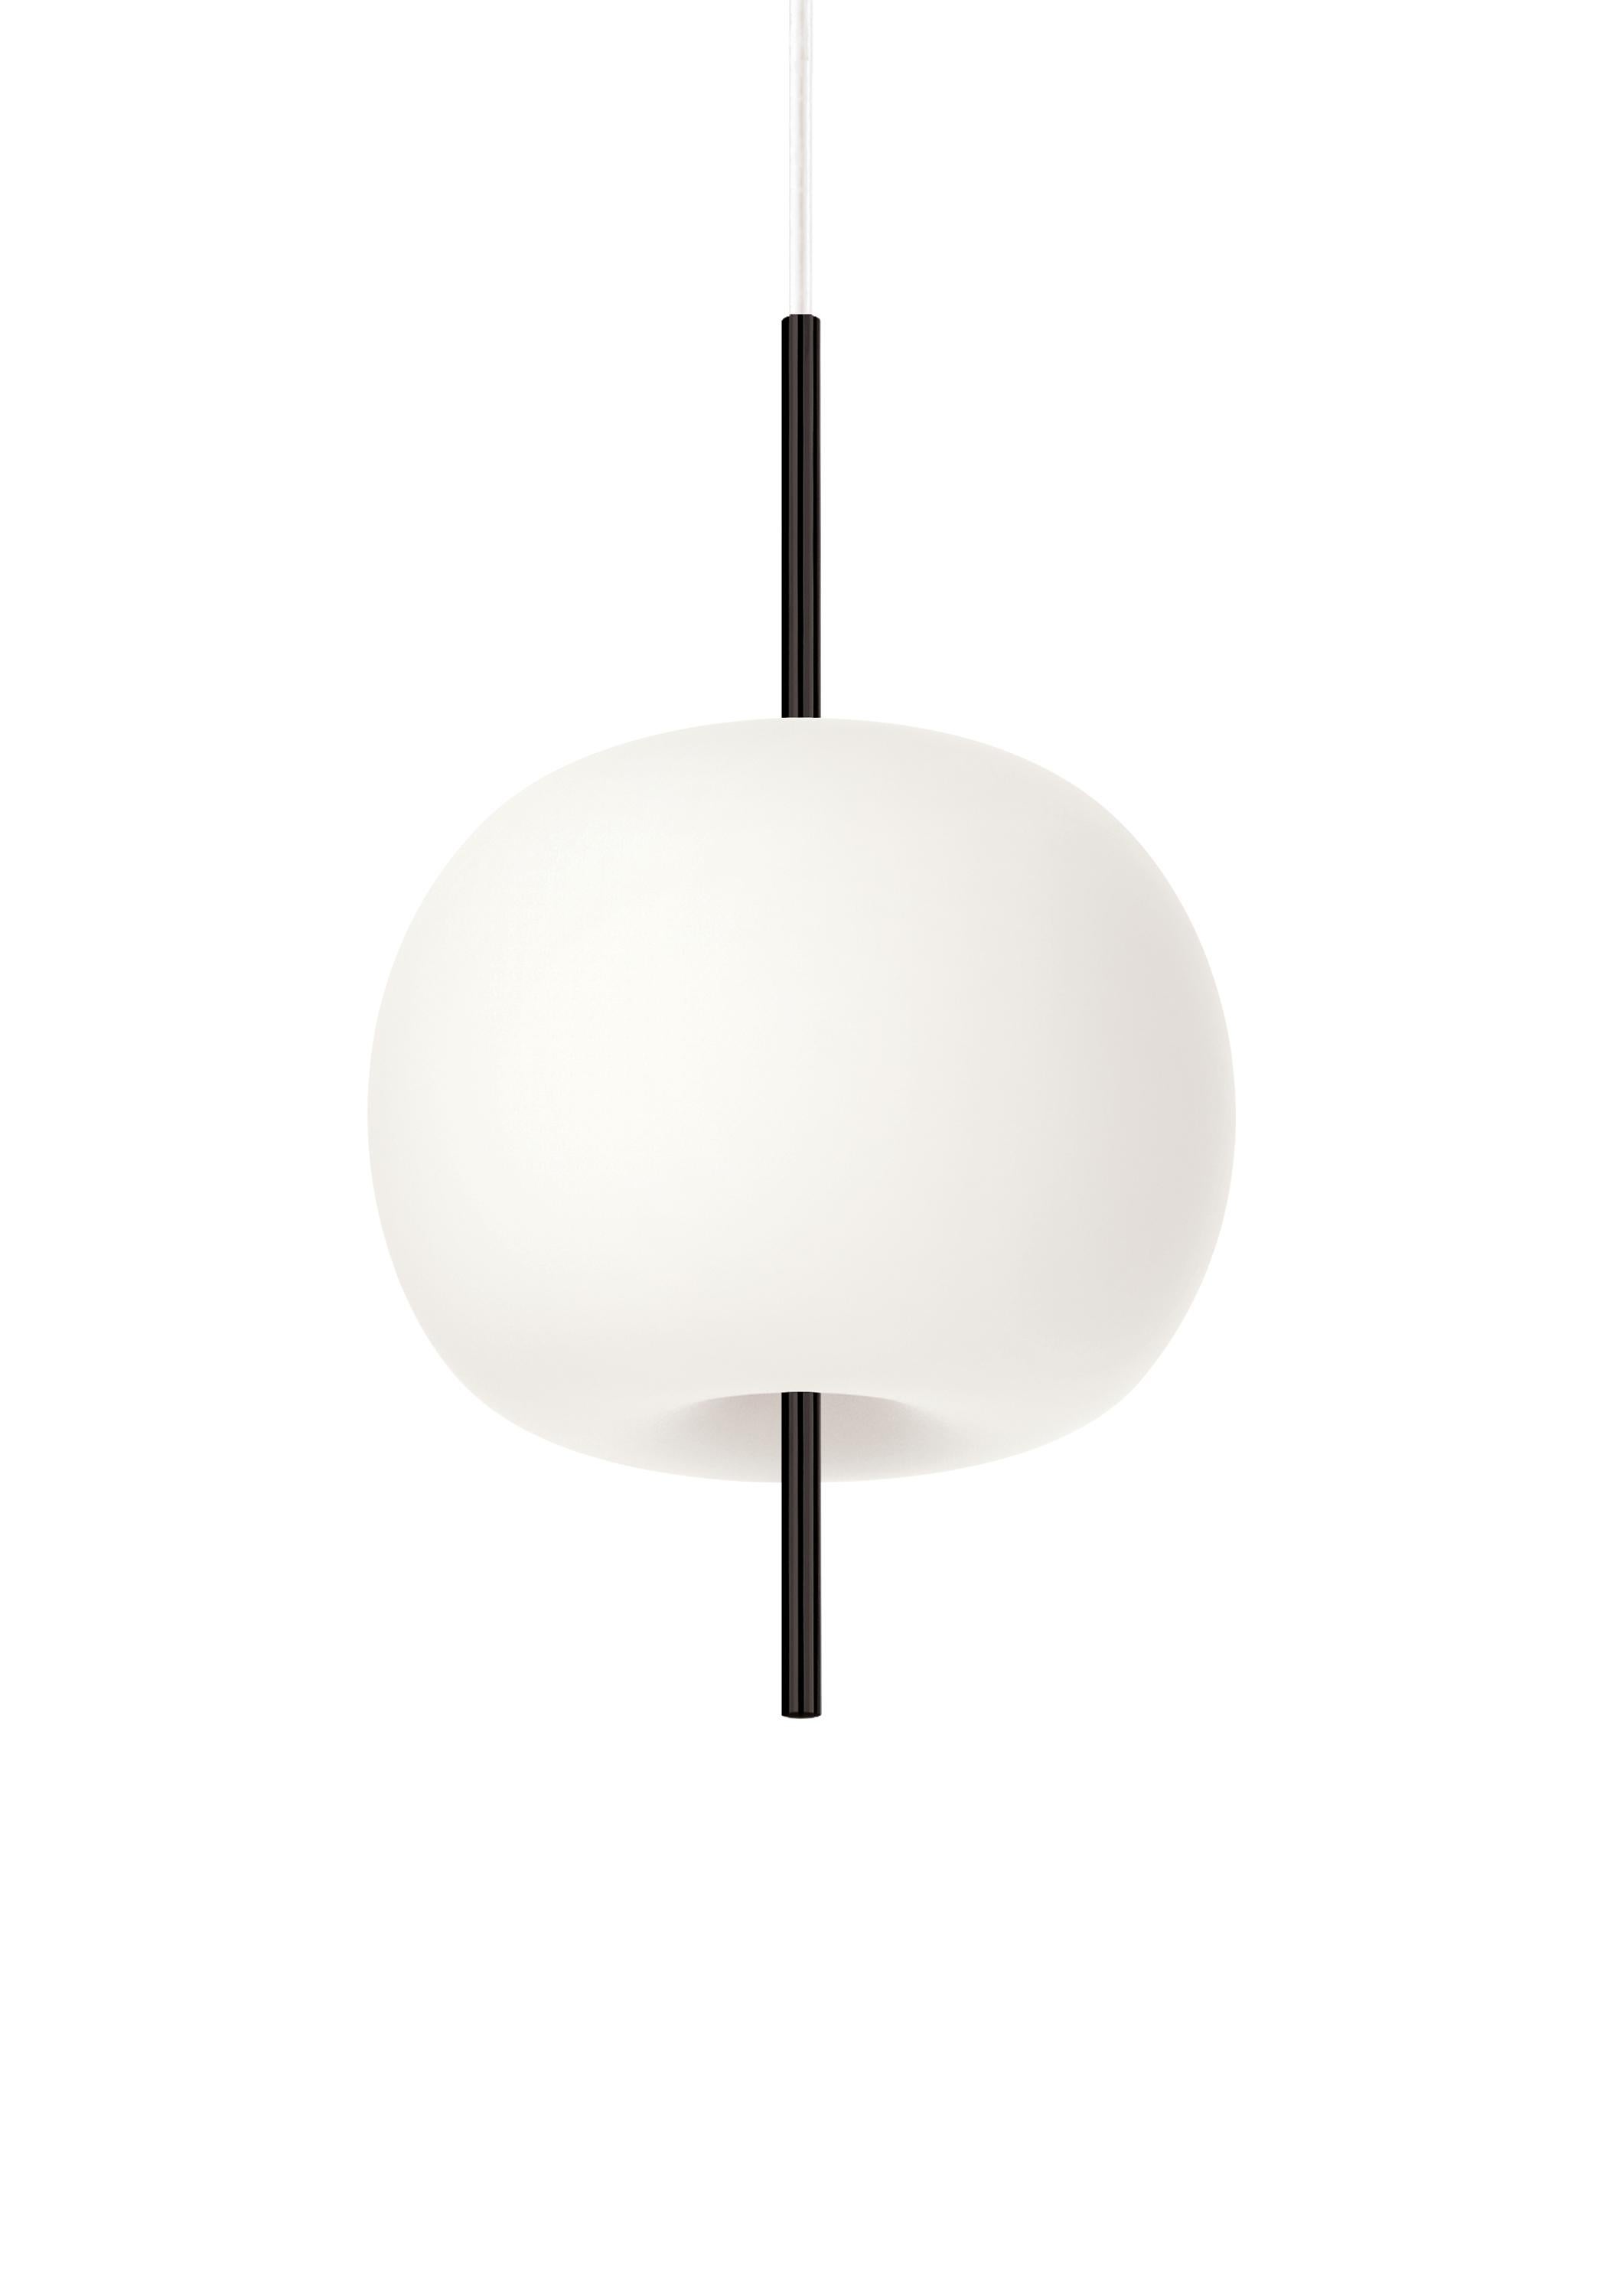 Large 'Kushi' Opaline Glass and Metal Suspension Lamp for KDLN in Black For Sale 5